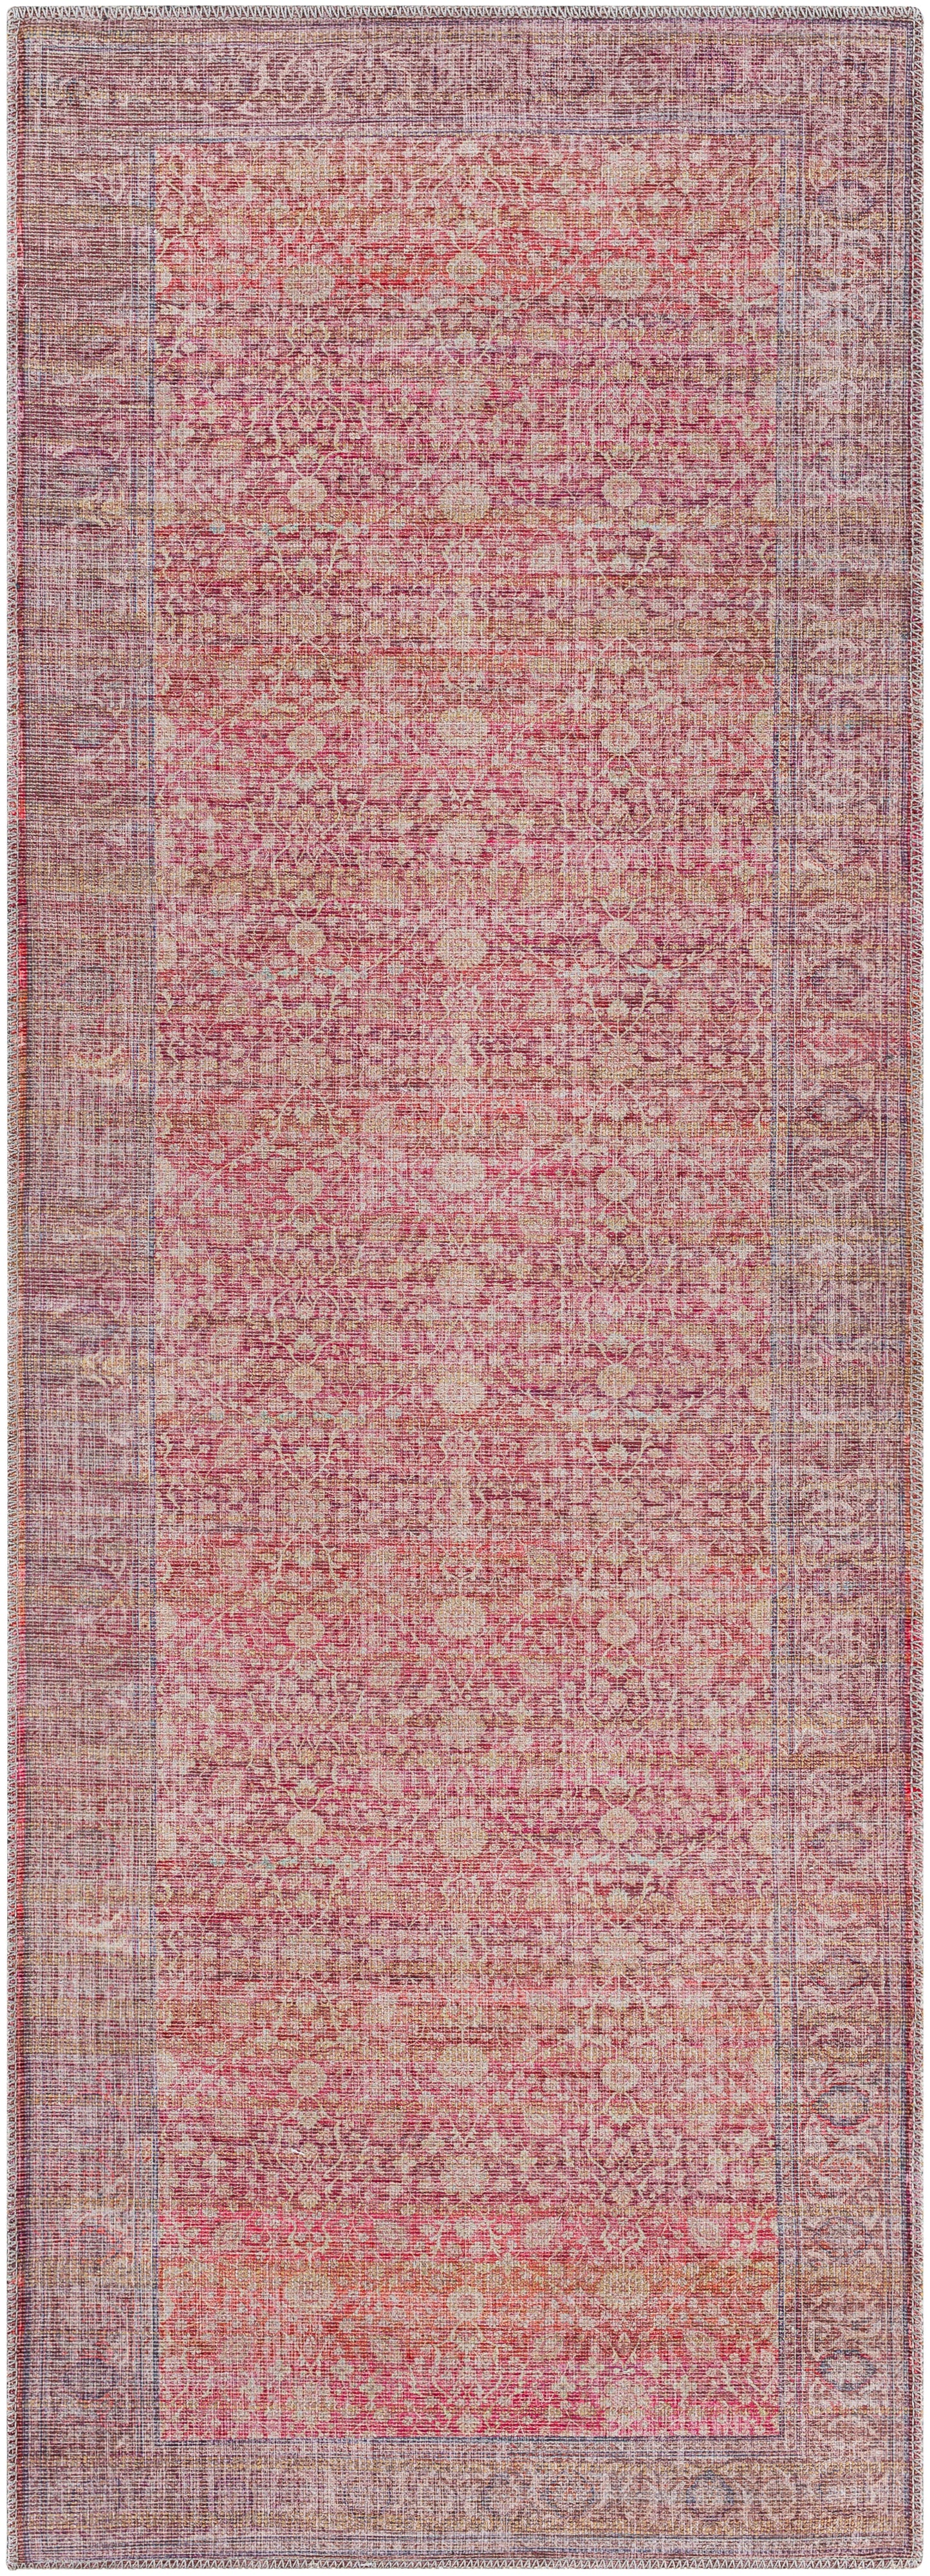 Cobb 29930 Machine Woven Synthetic Blend Indoor Area Rug by Surya Rugs